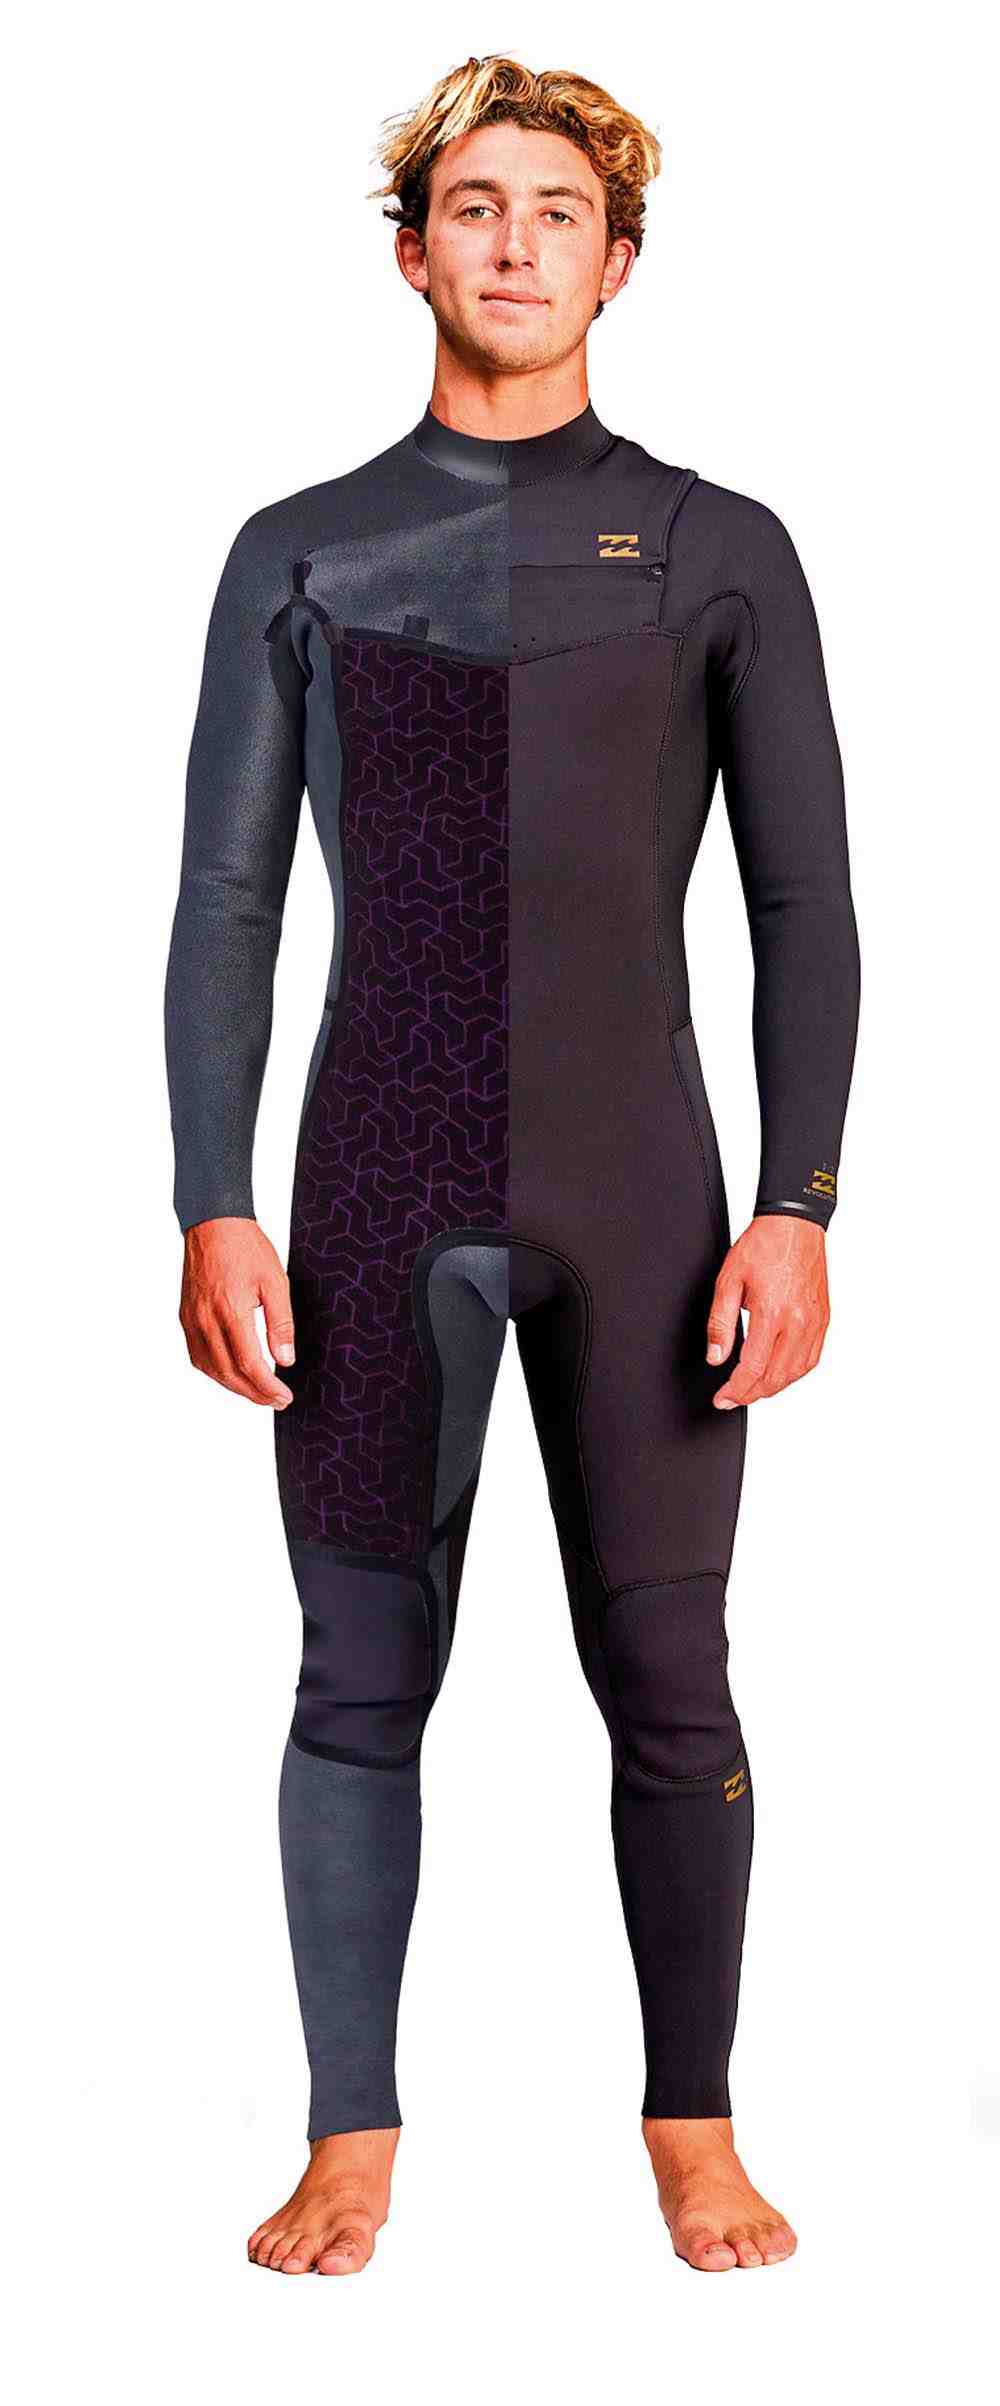 What does swimming in a wetsuit feel like?